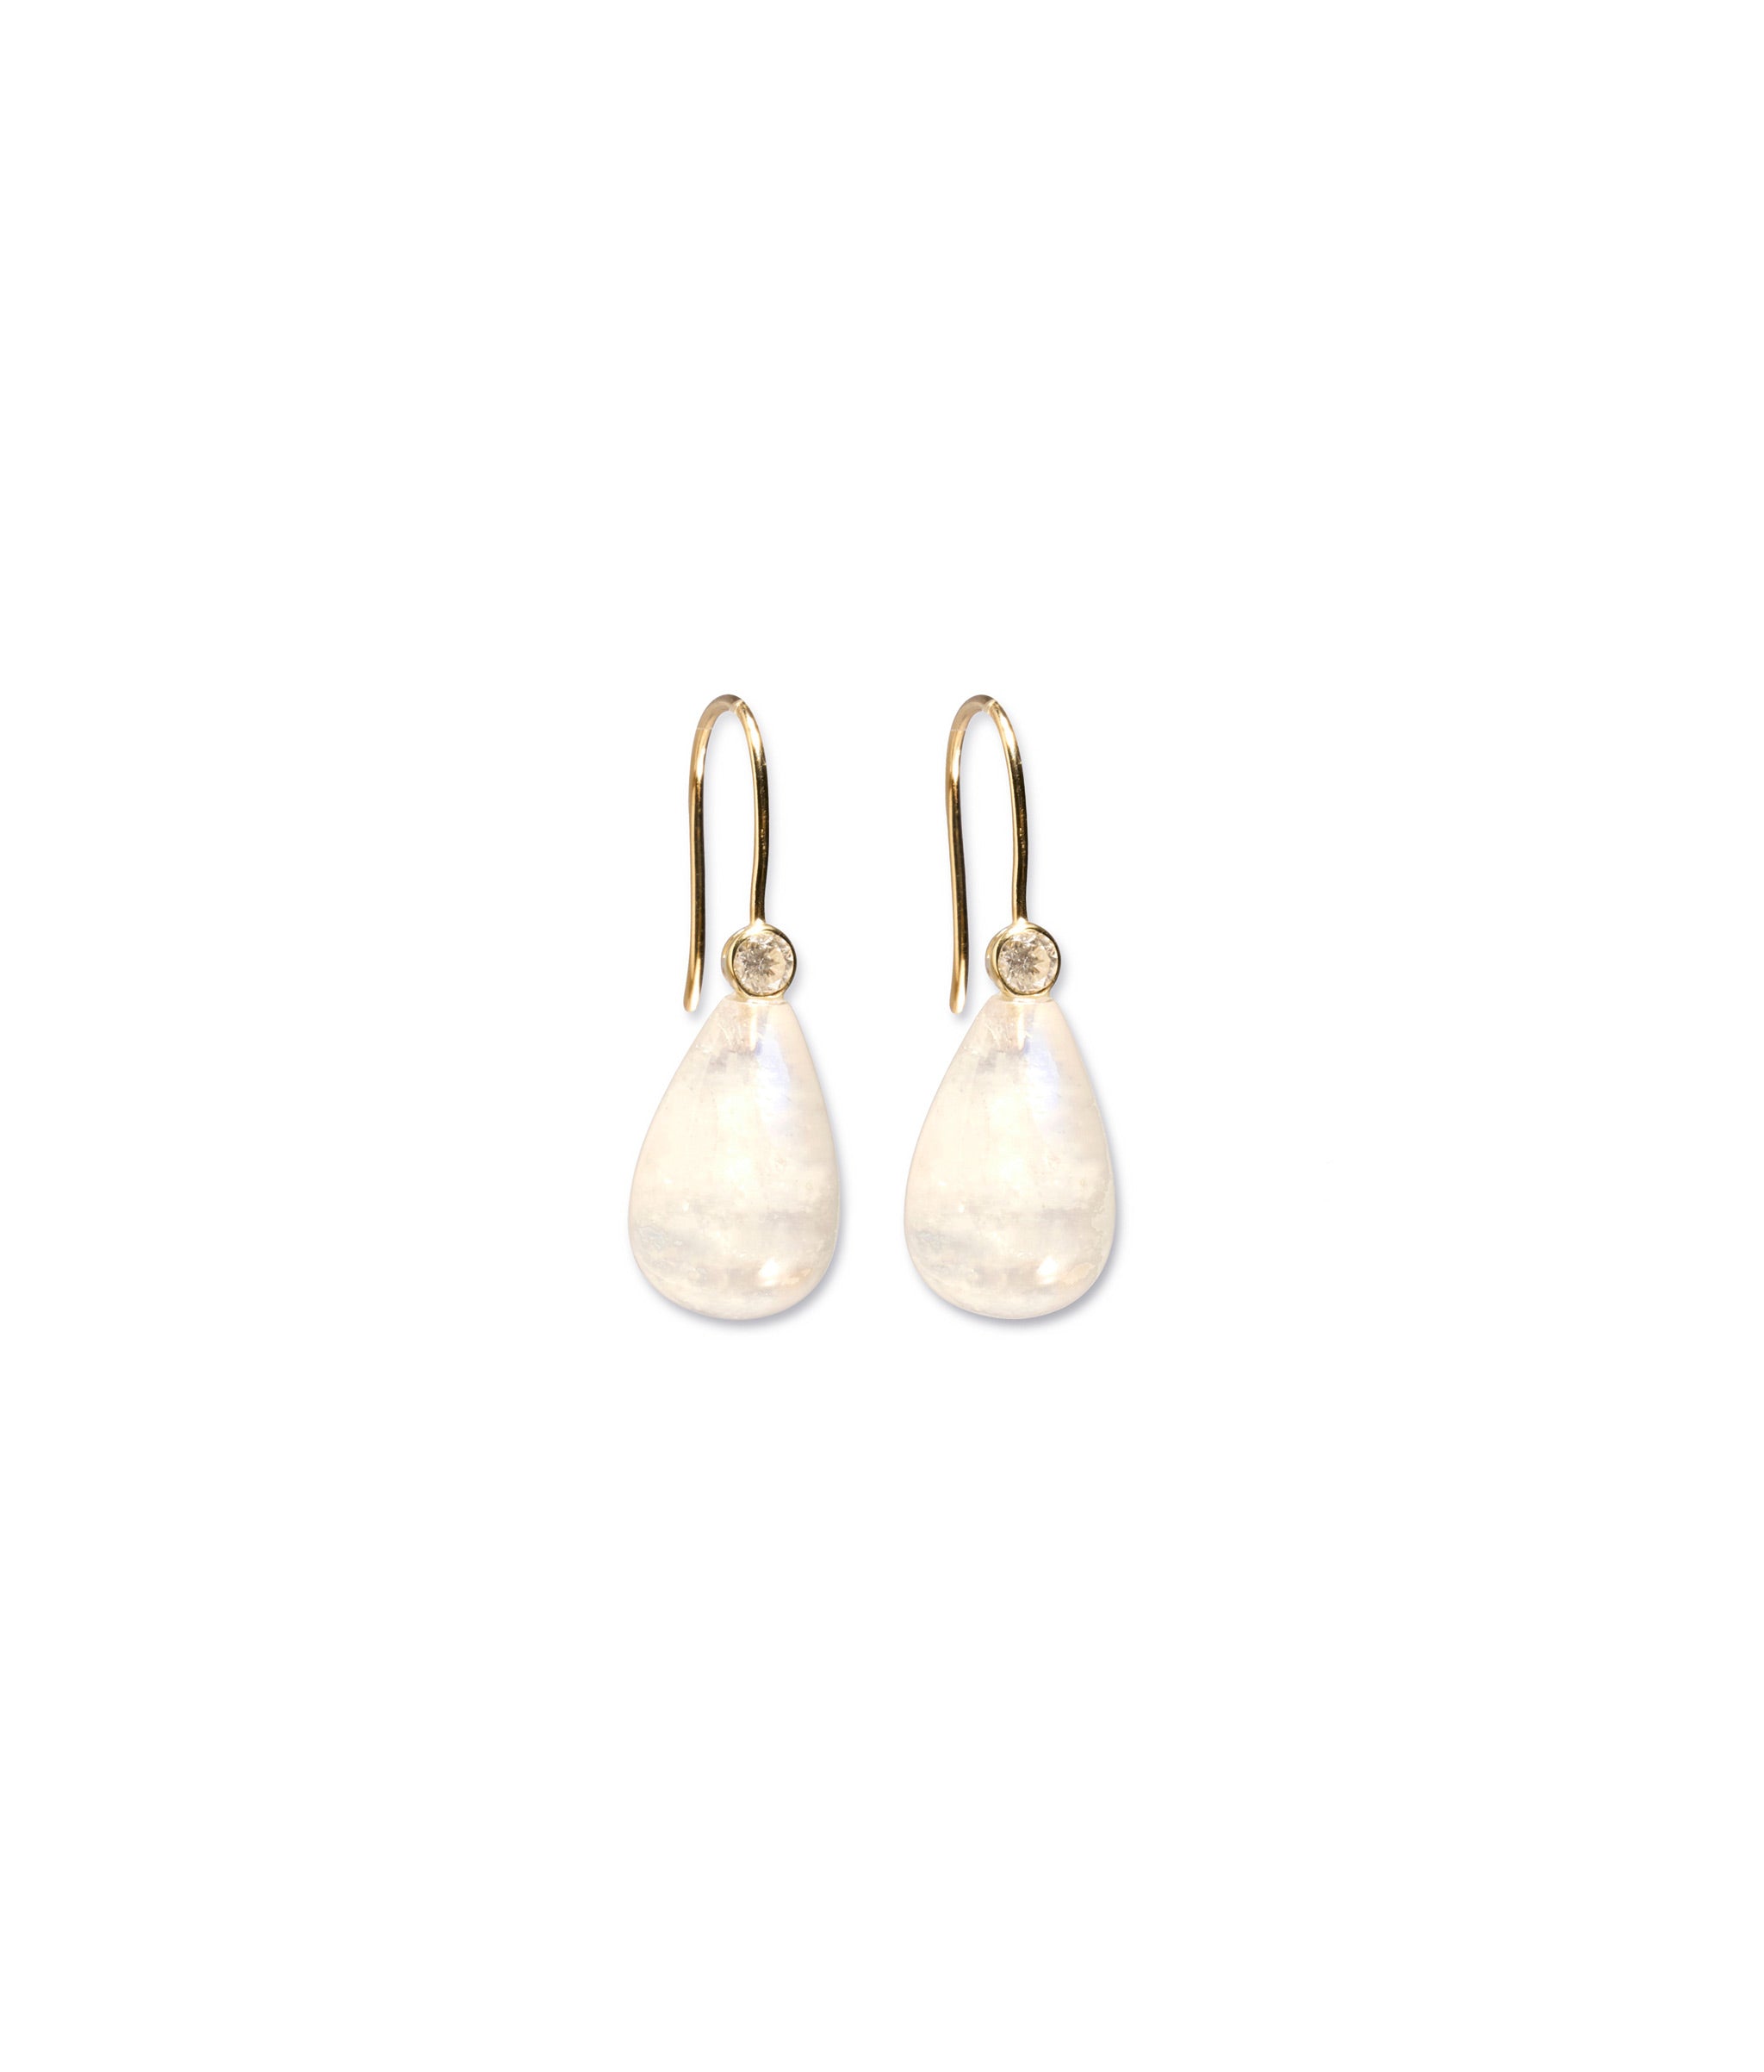 Moonstone and Diamond 14K Earrings. Yellow gold earwires with small diamond tops and moonstone drops. 